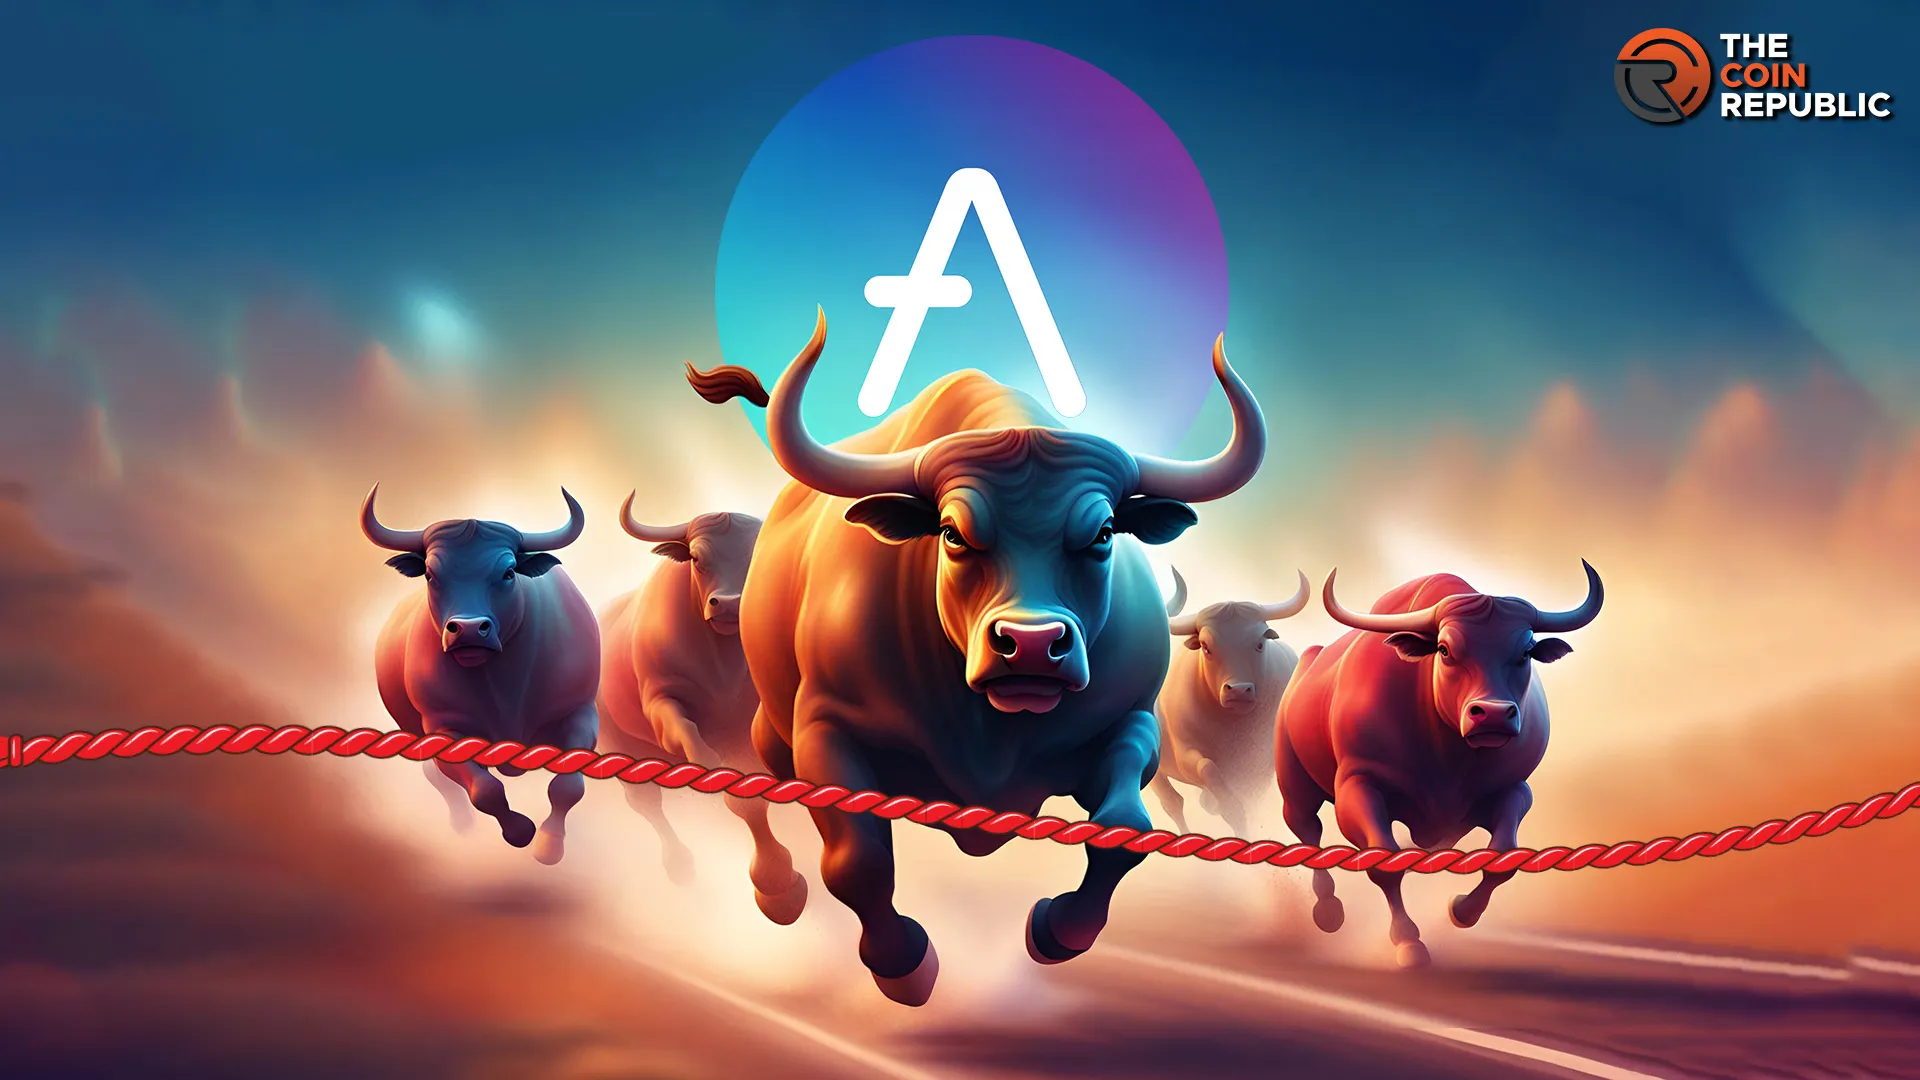 AAVE Crypto Price Forecast: Will It Continue To Surge Or Break Down?